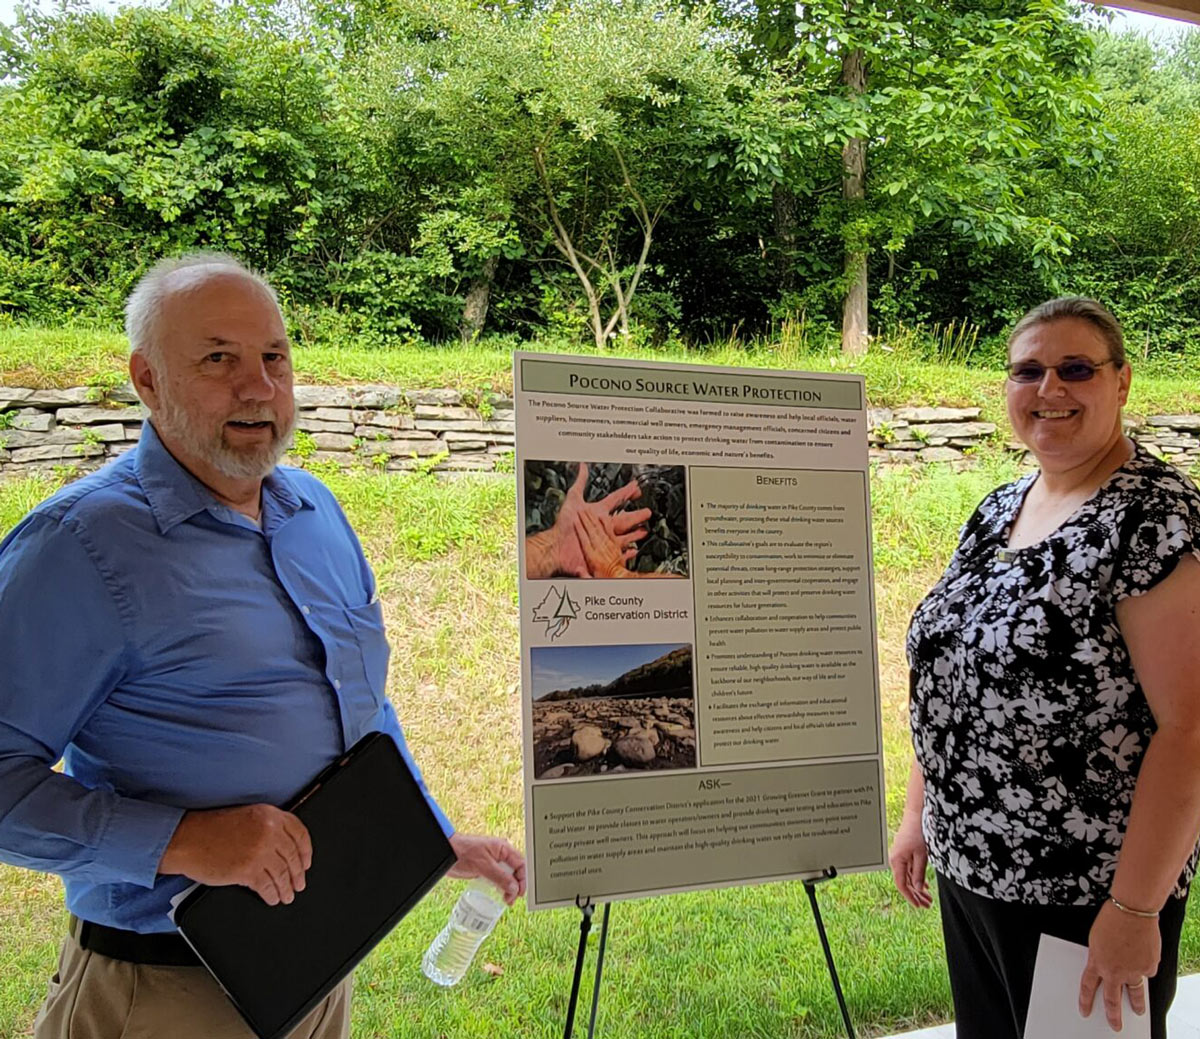 Staff and board member pose with a Pocono Source Water Protection Collaborative poster